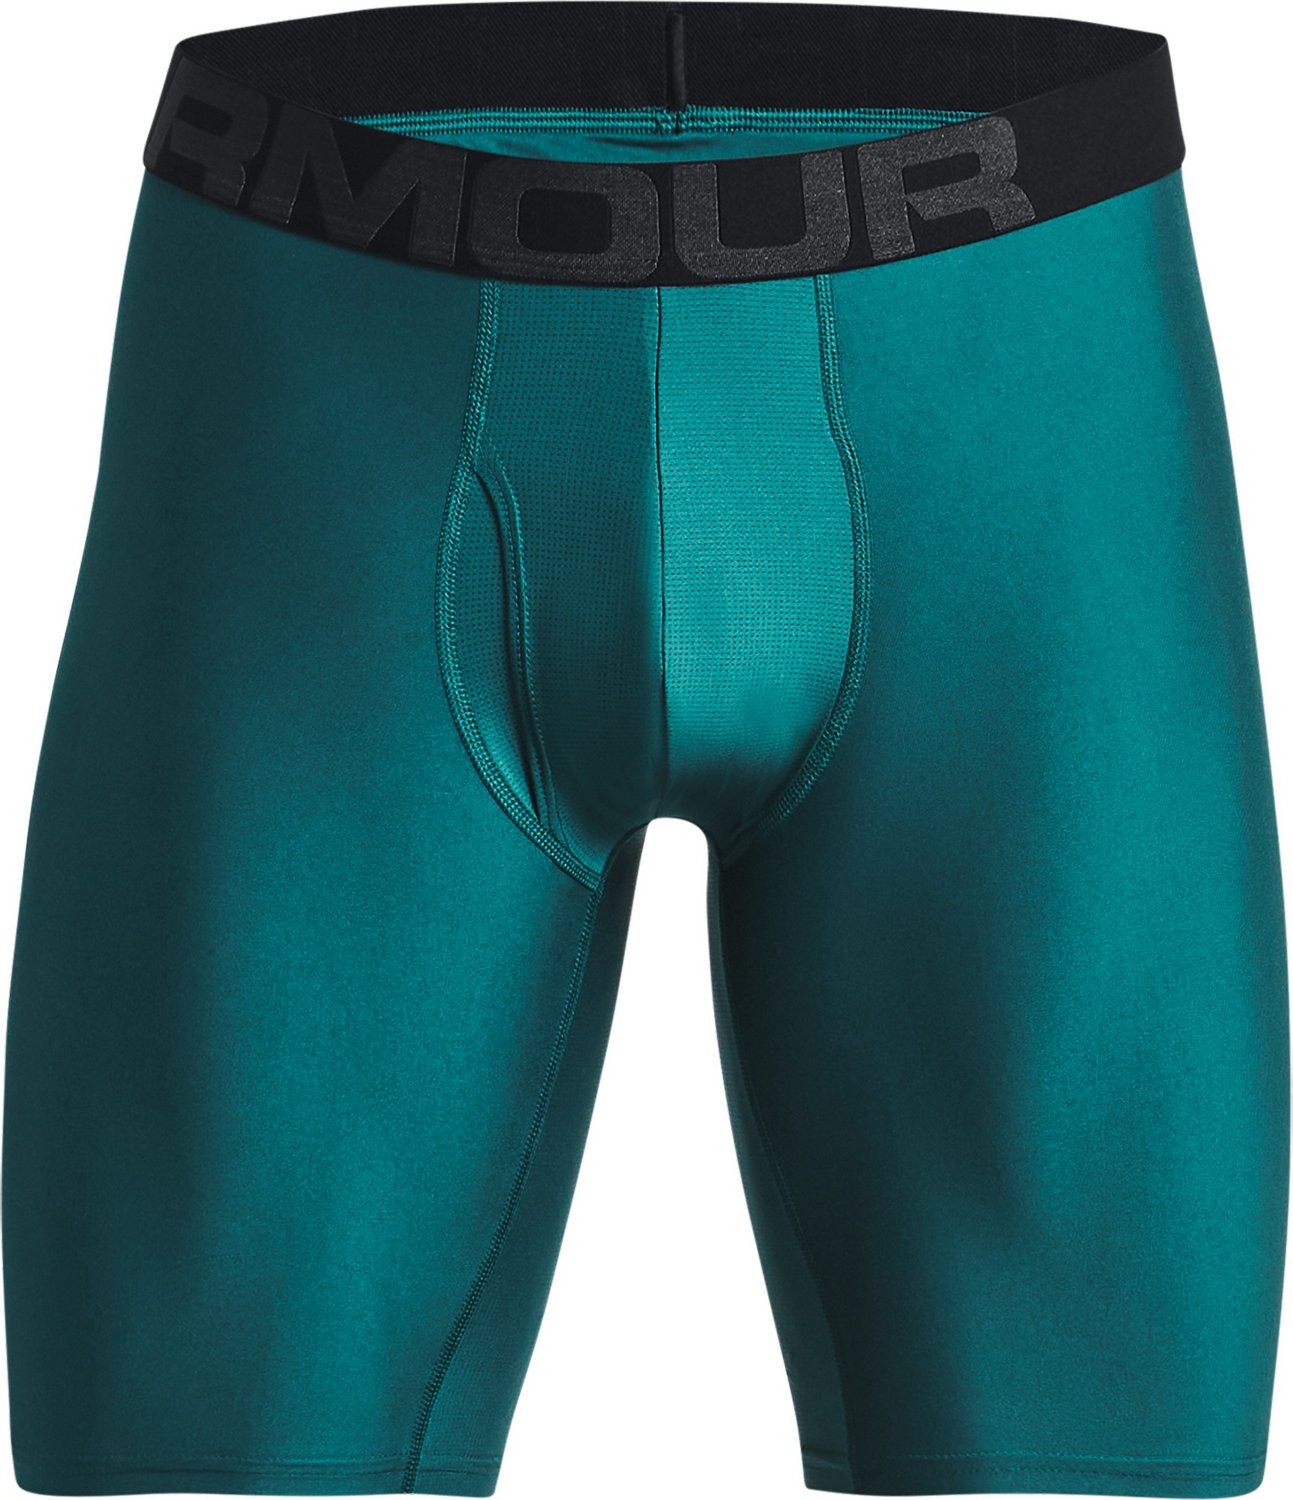 Tech 9 Inch Fitted Boxer Briefs - 2 Pack by Under Armour